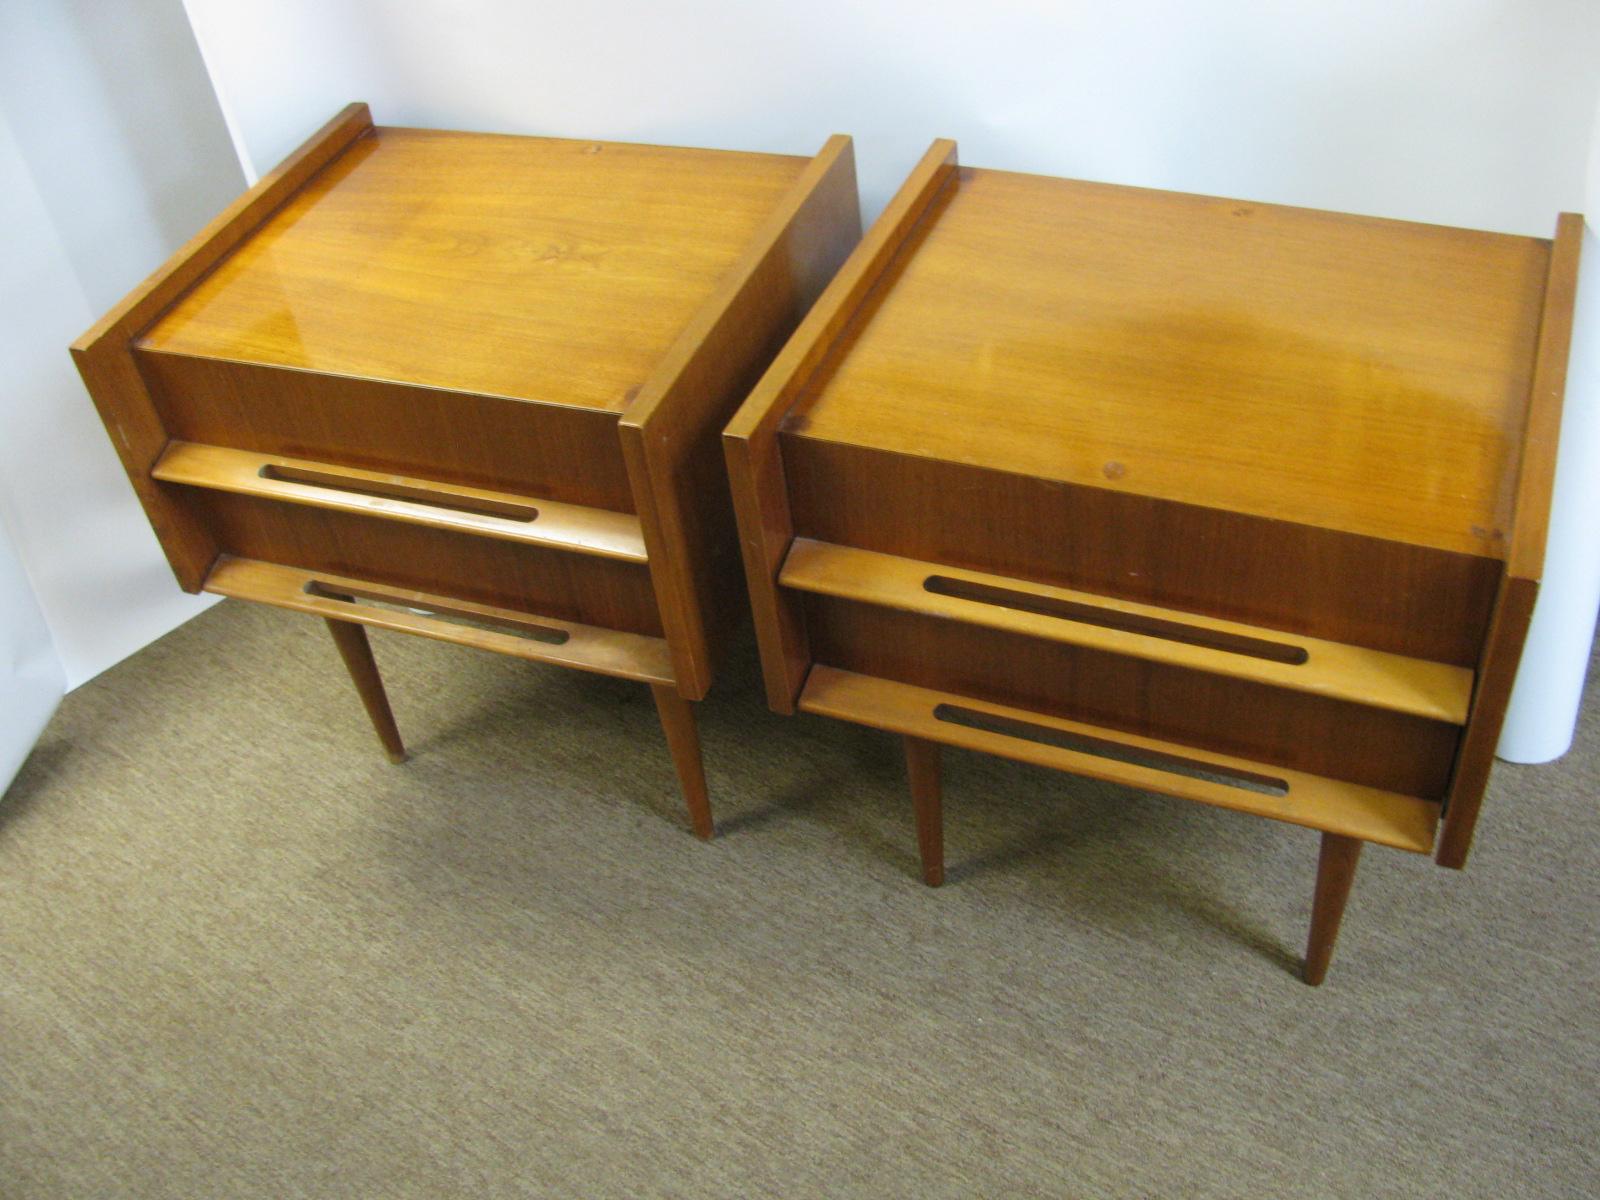 Pair of Edmond Spence Mid-Century Modern Night Tables, Made in Sweden For Sale 1